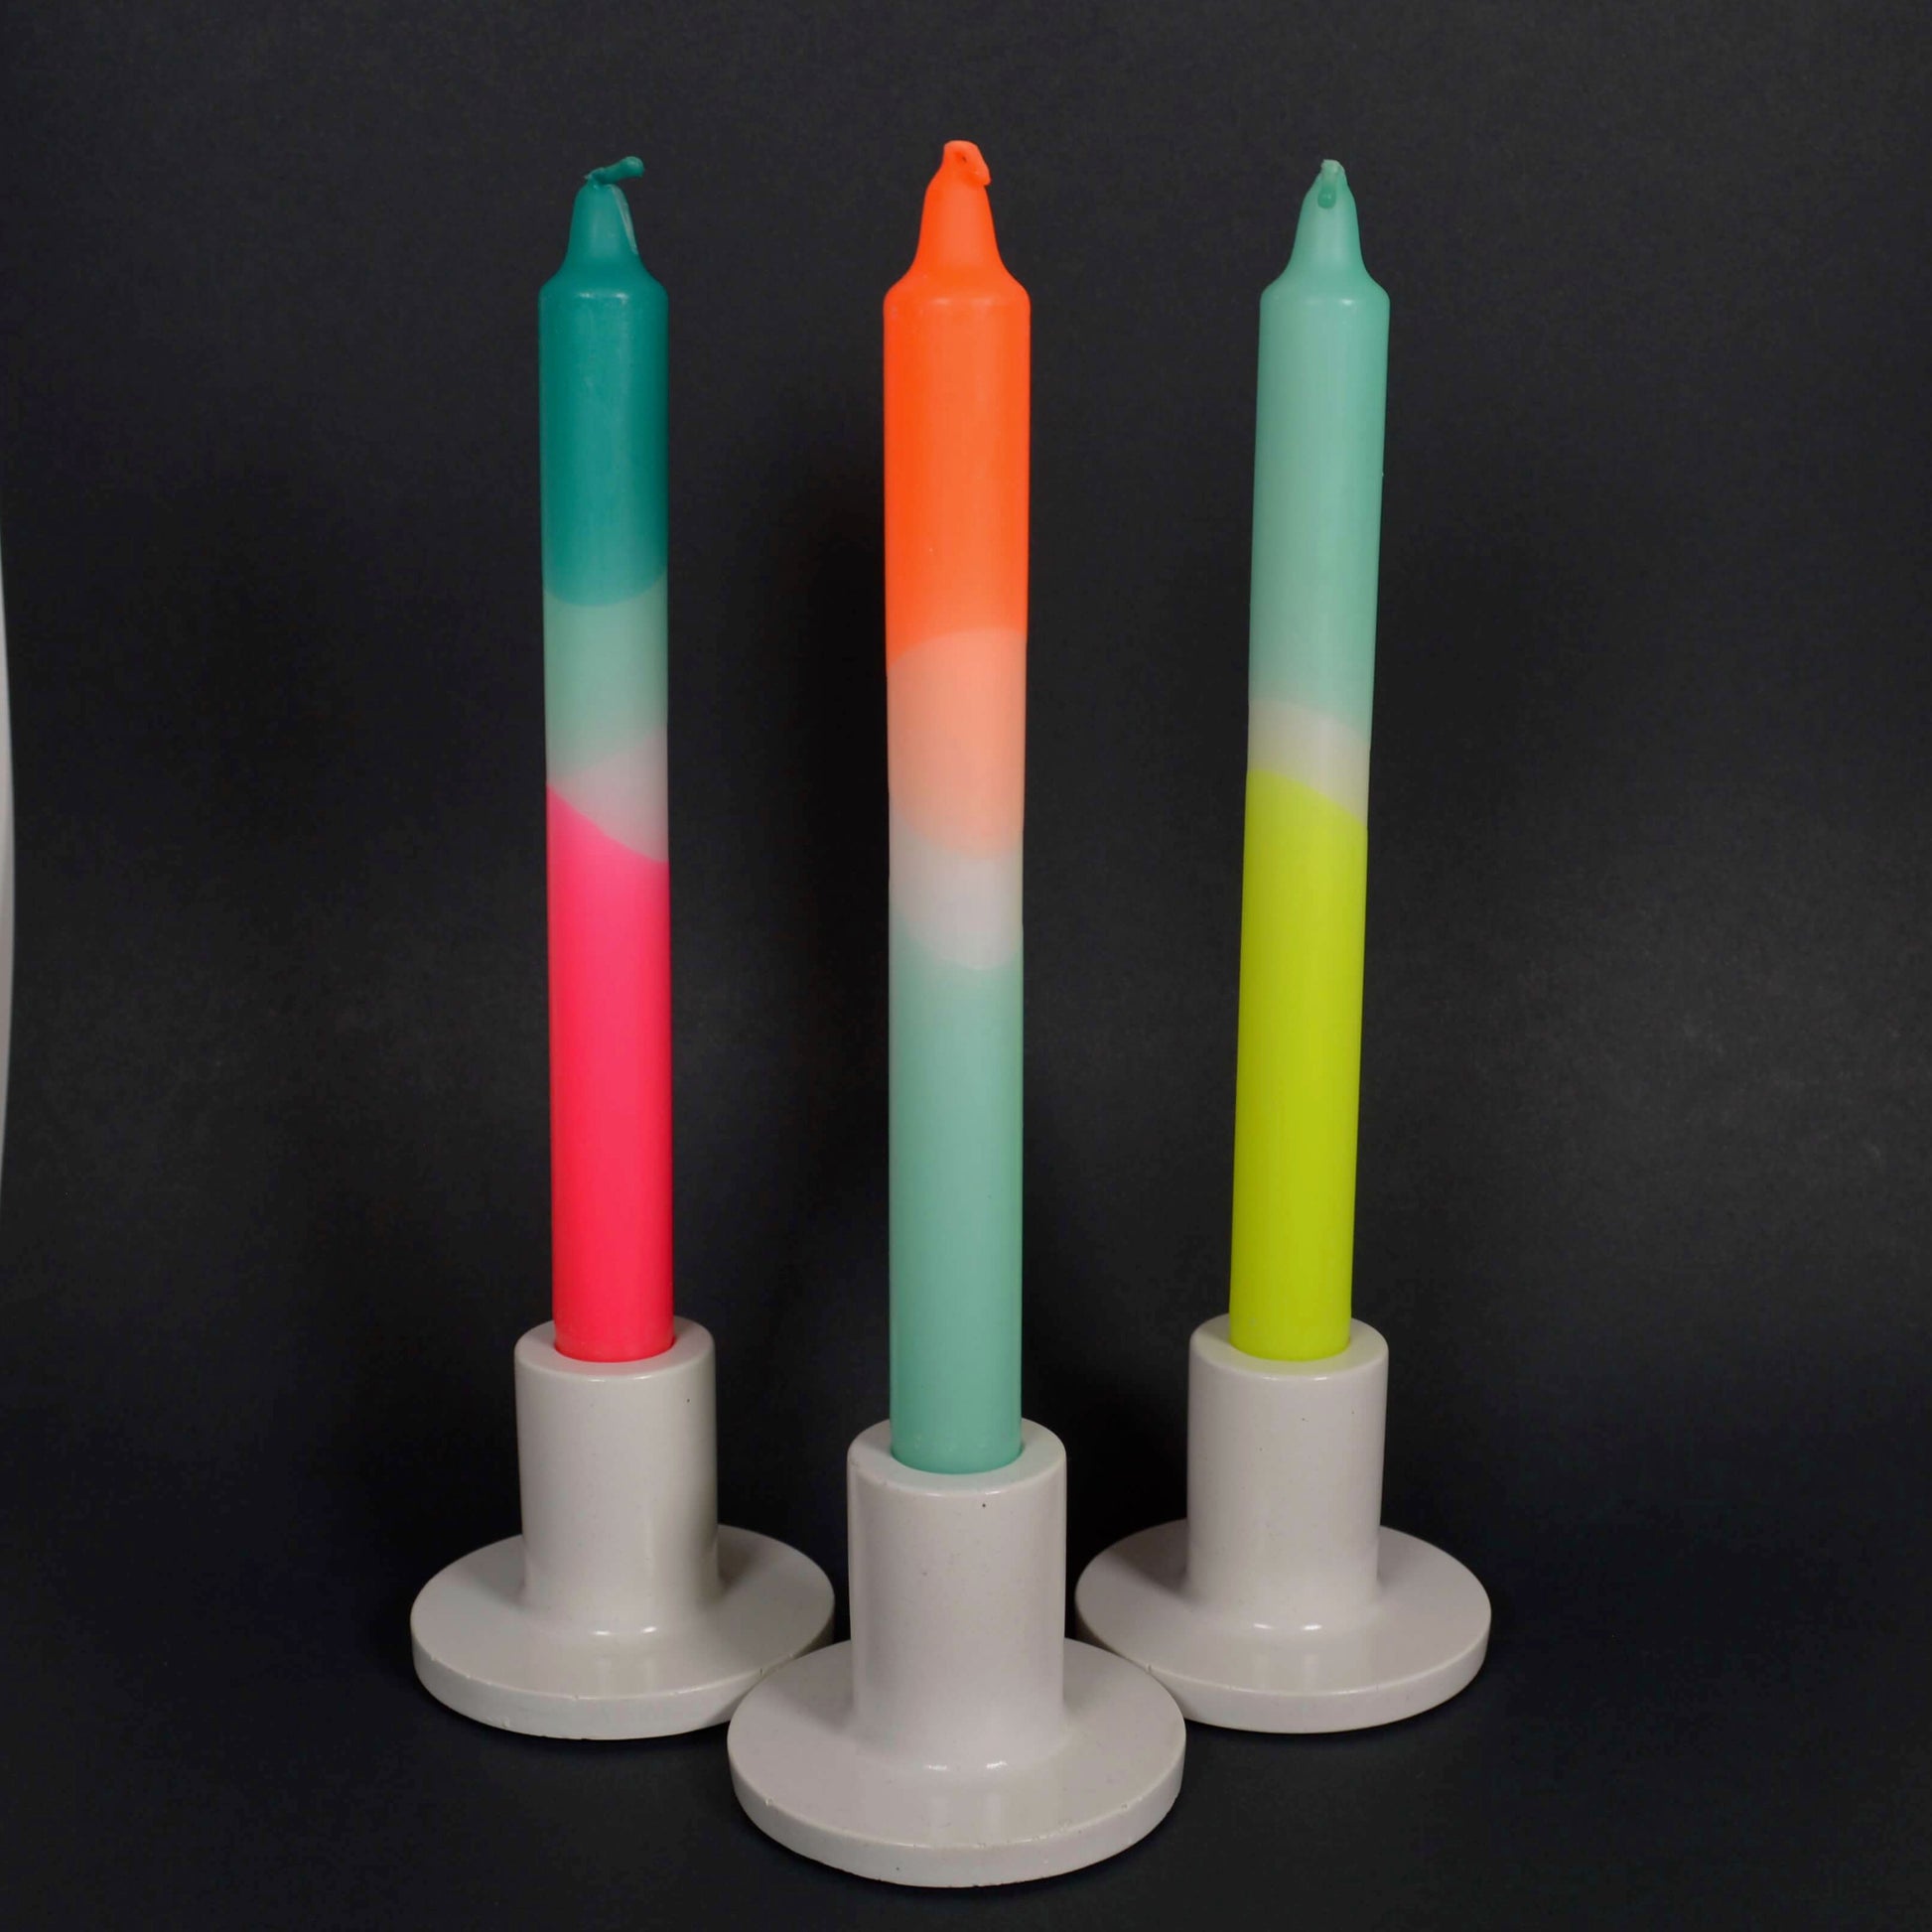 3 Neon Candle Sticks placed in Holders